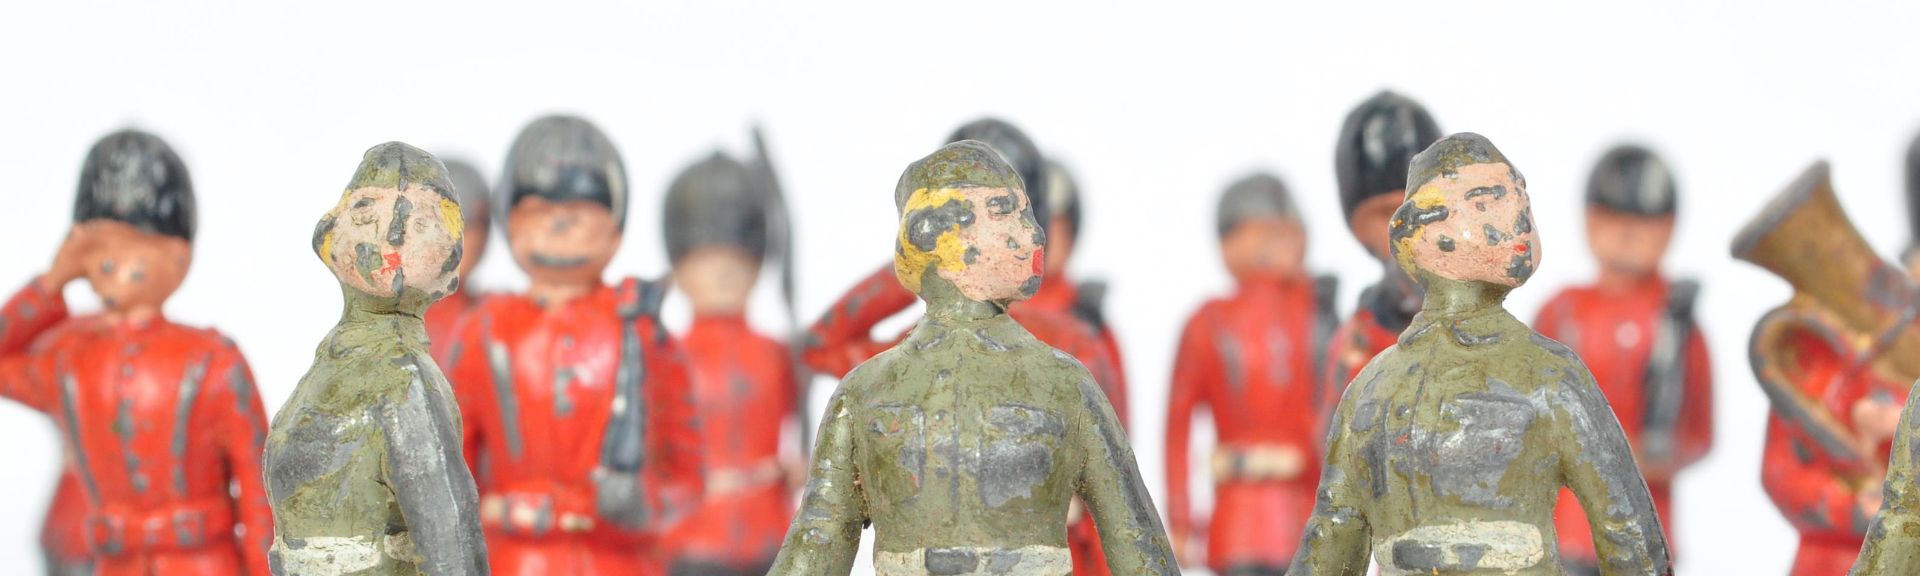 MID CENTURY HAND PAINTED LEAD SOLDIER FIGURES - Image 5 of 6